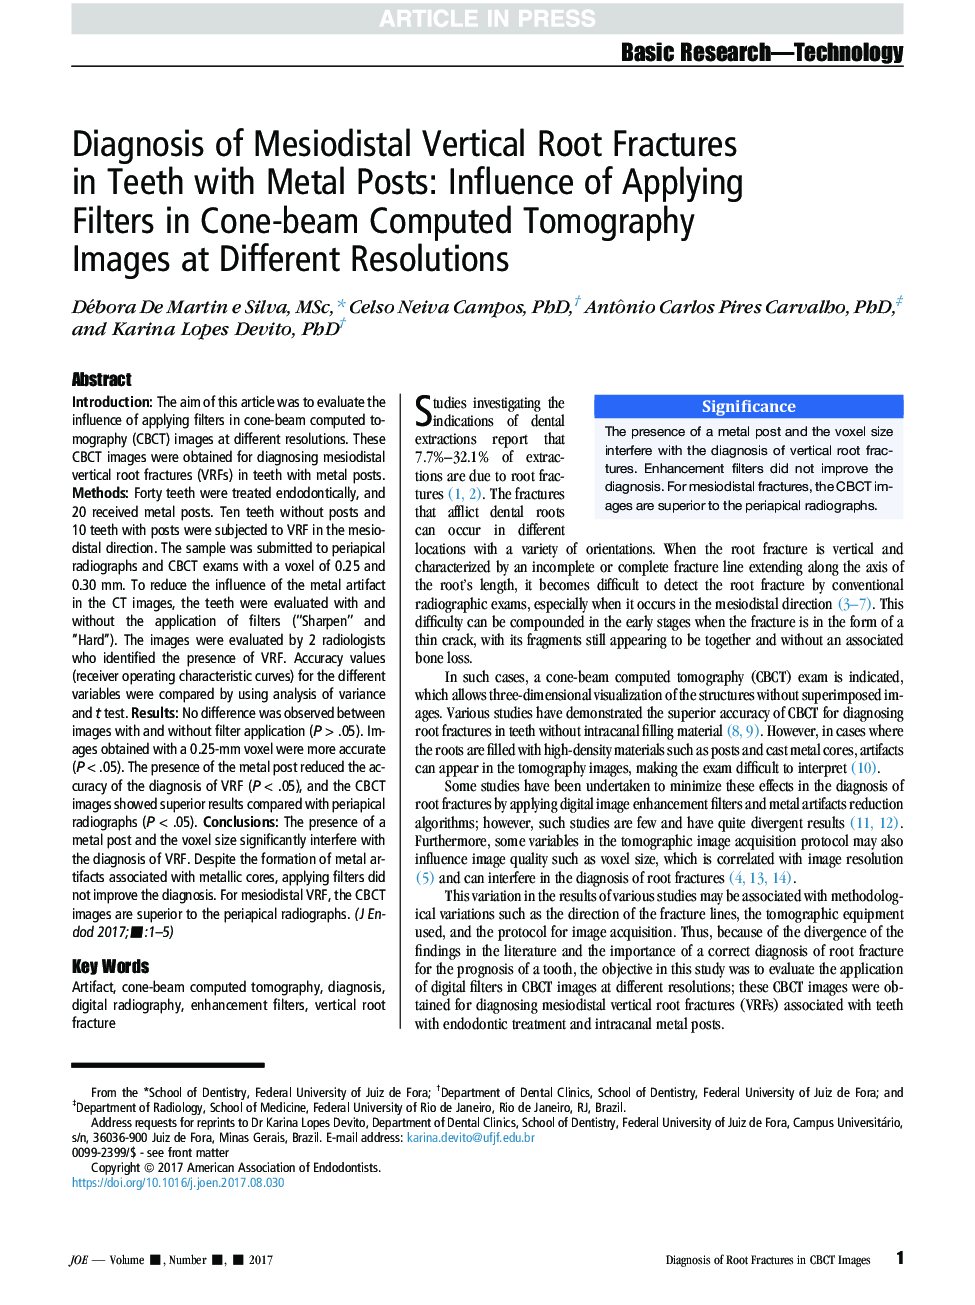 Diagnosis of Mesiodistal Vertical Root Fractures in Teeth with Metal Posts: Influence of Applying Filters in Cone-beam Computed Tomography Images at Different Resolutions